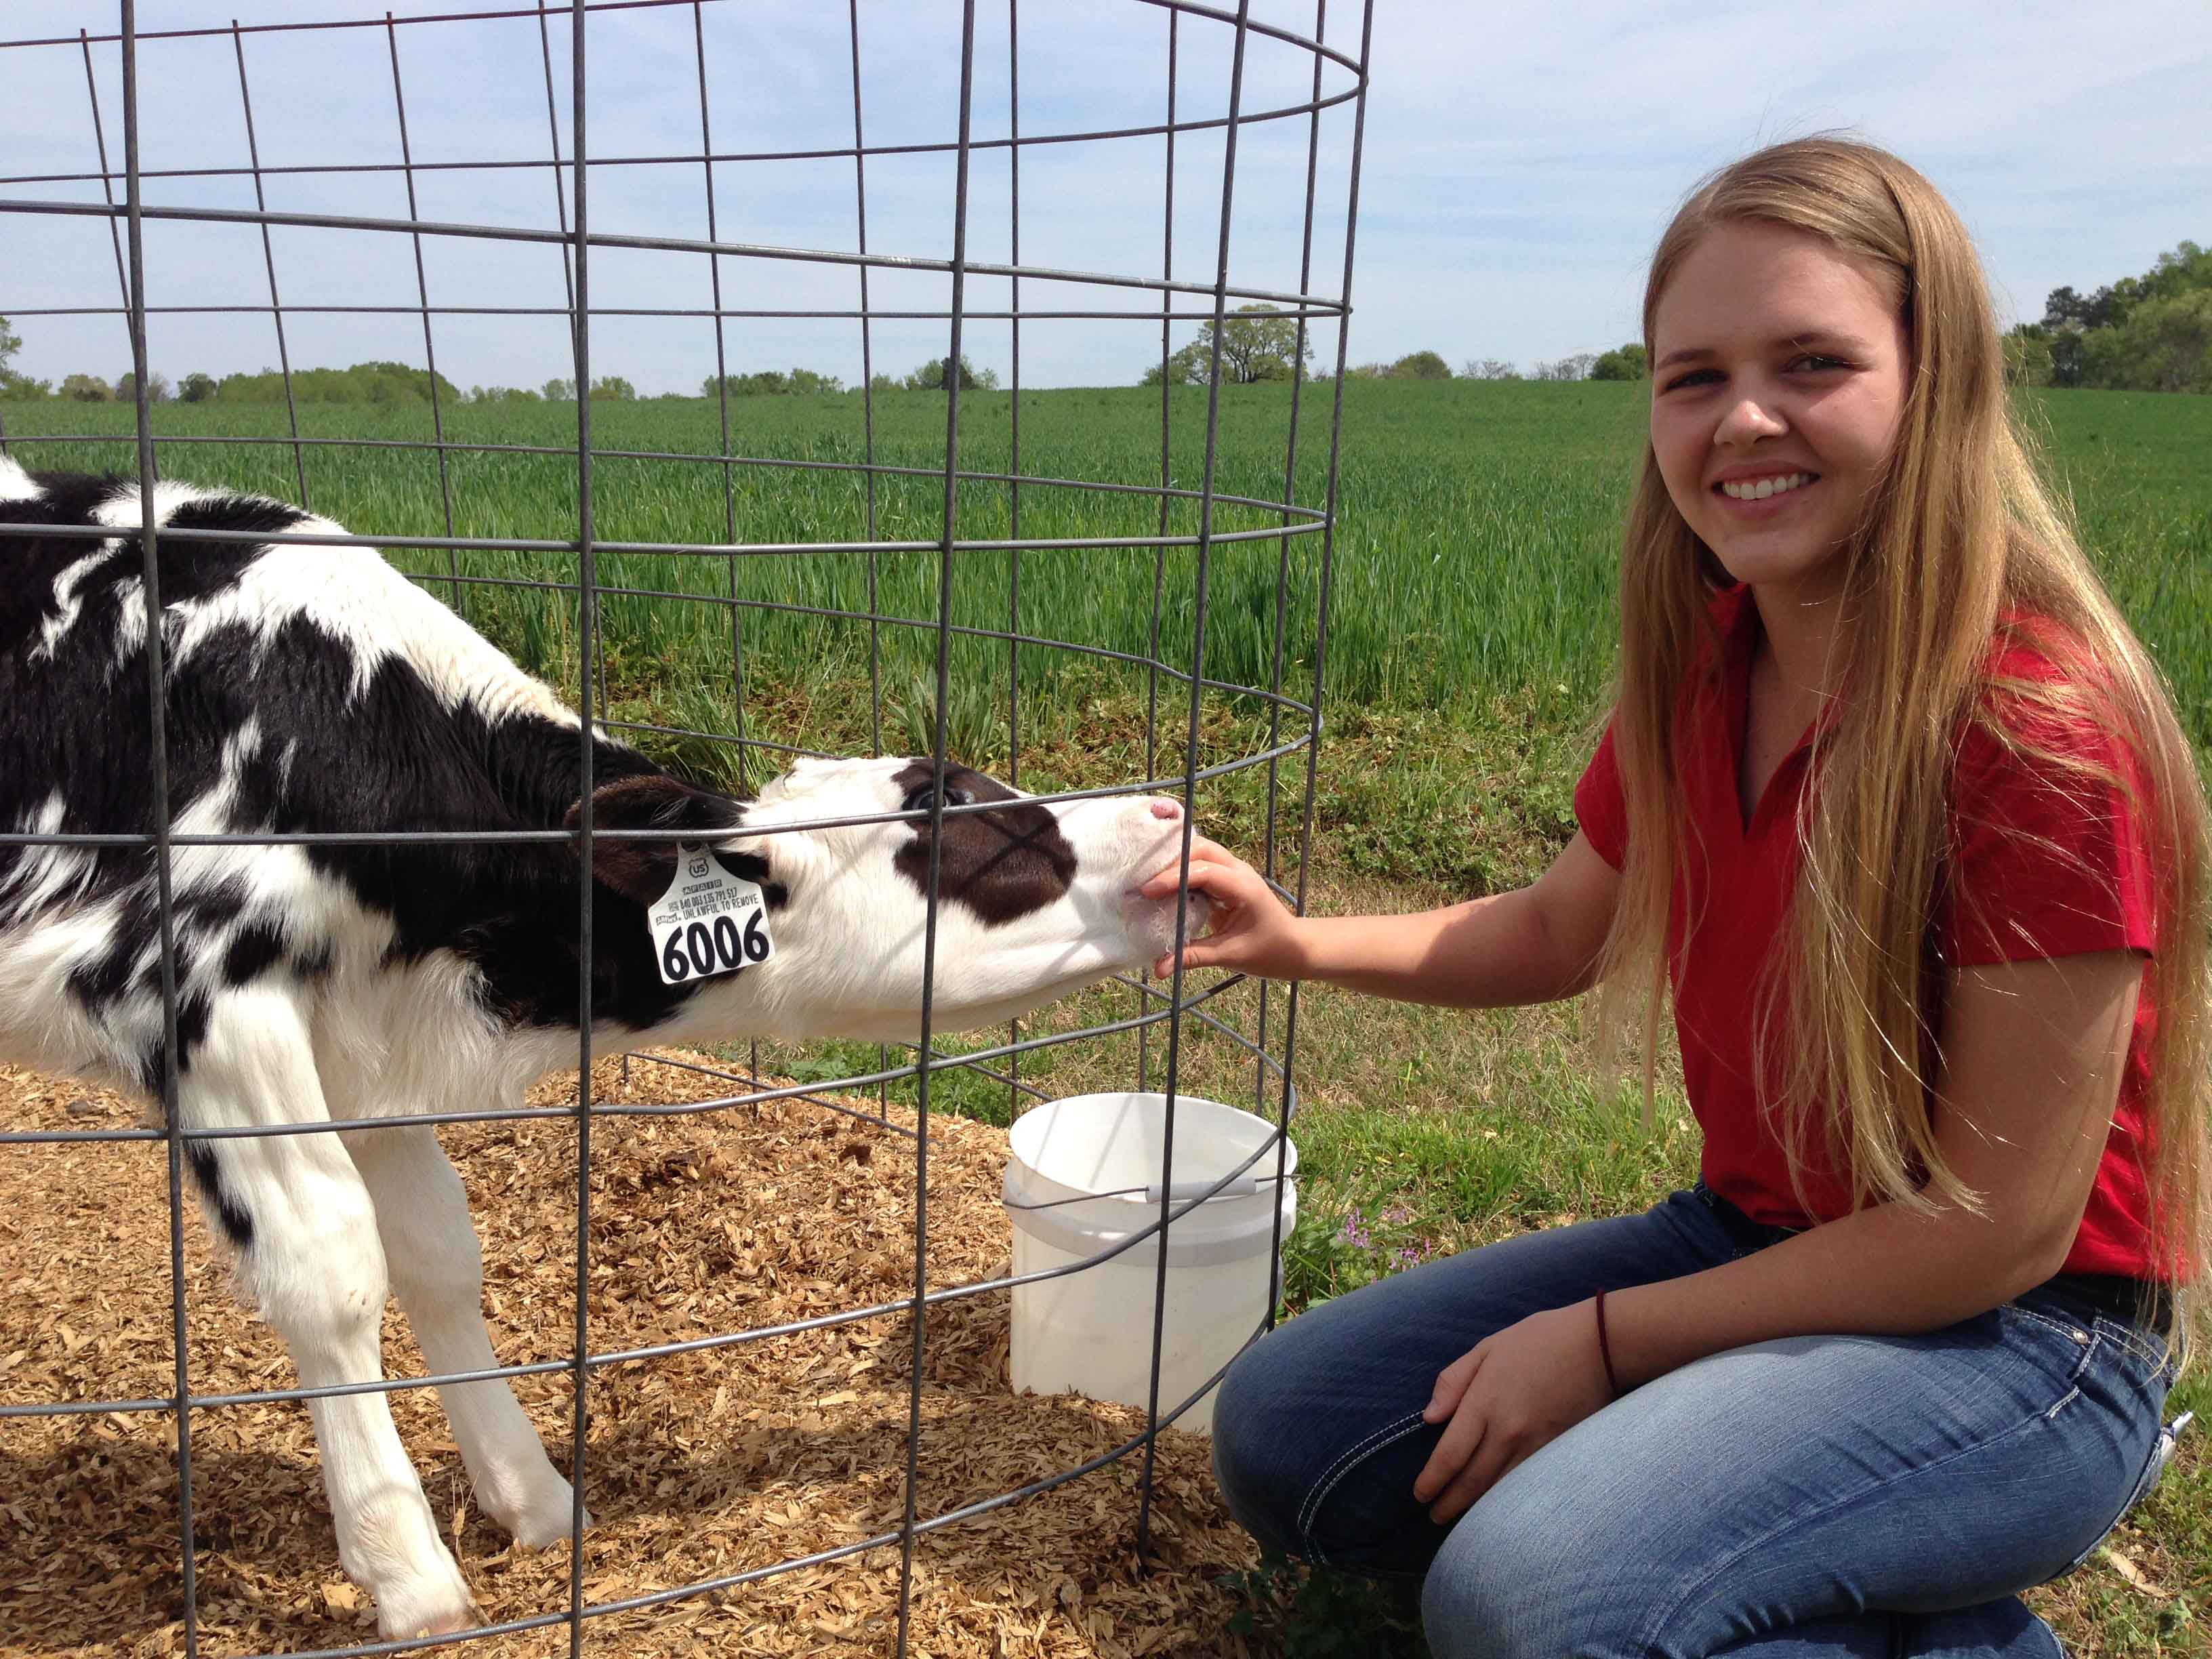 Kayla Alward, a Guyton Native majoring in animal and dairy science at the University of Georgia, has won the Student Employee of the Year Award from the Southern Association of Student Employment Administrators. Alward, who won the award for dedication to the calves at the UGA Teaching Dairy, is the first UGA student to win the award.